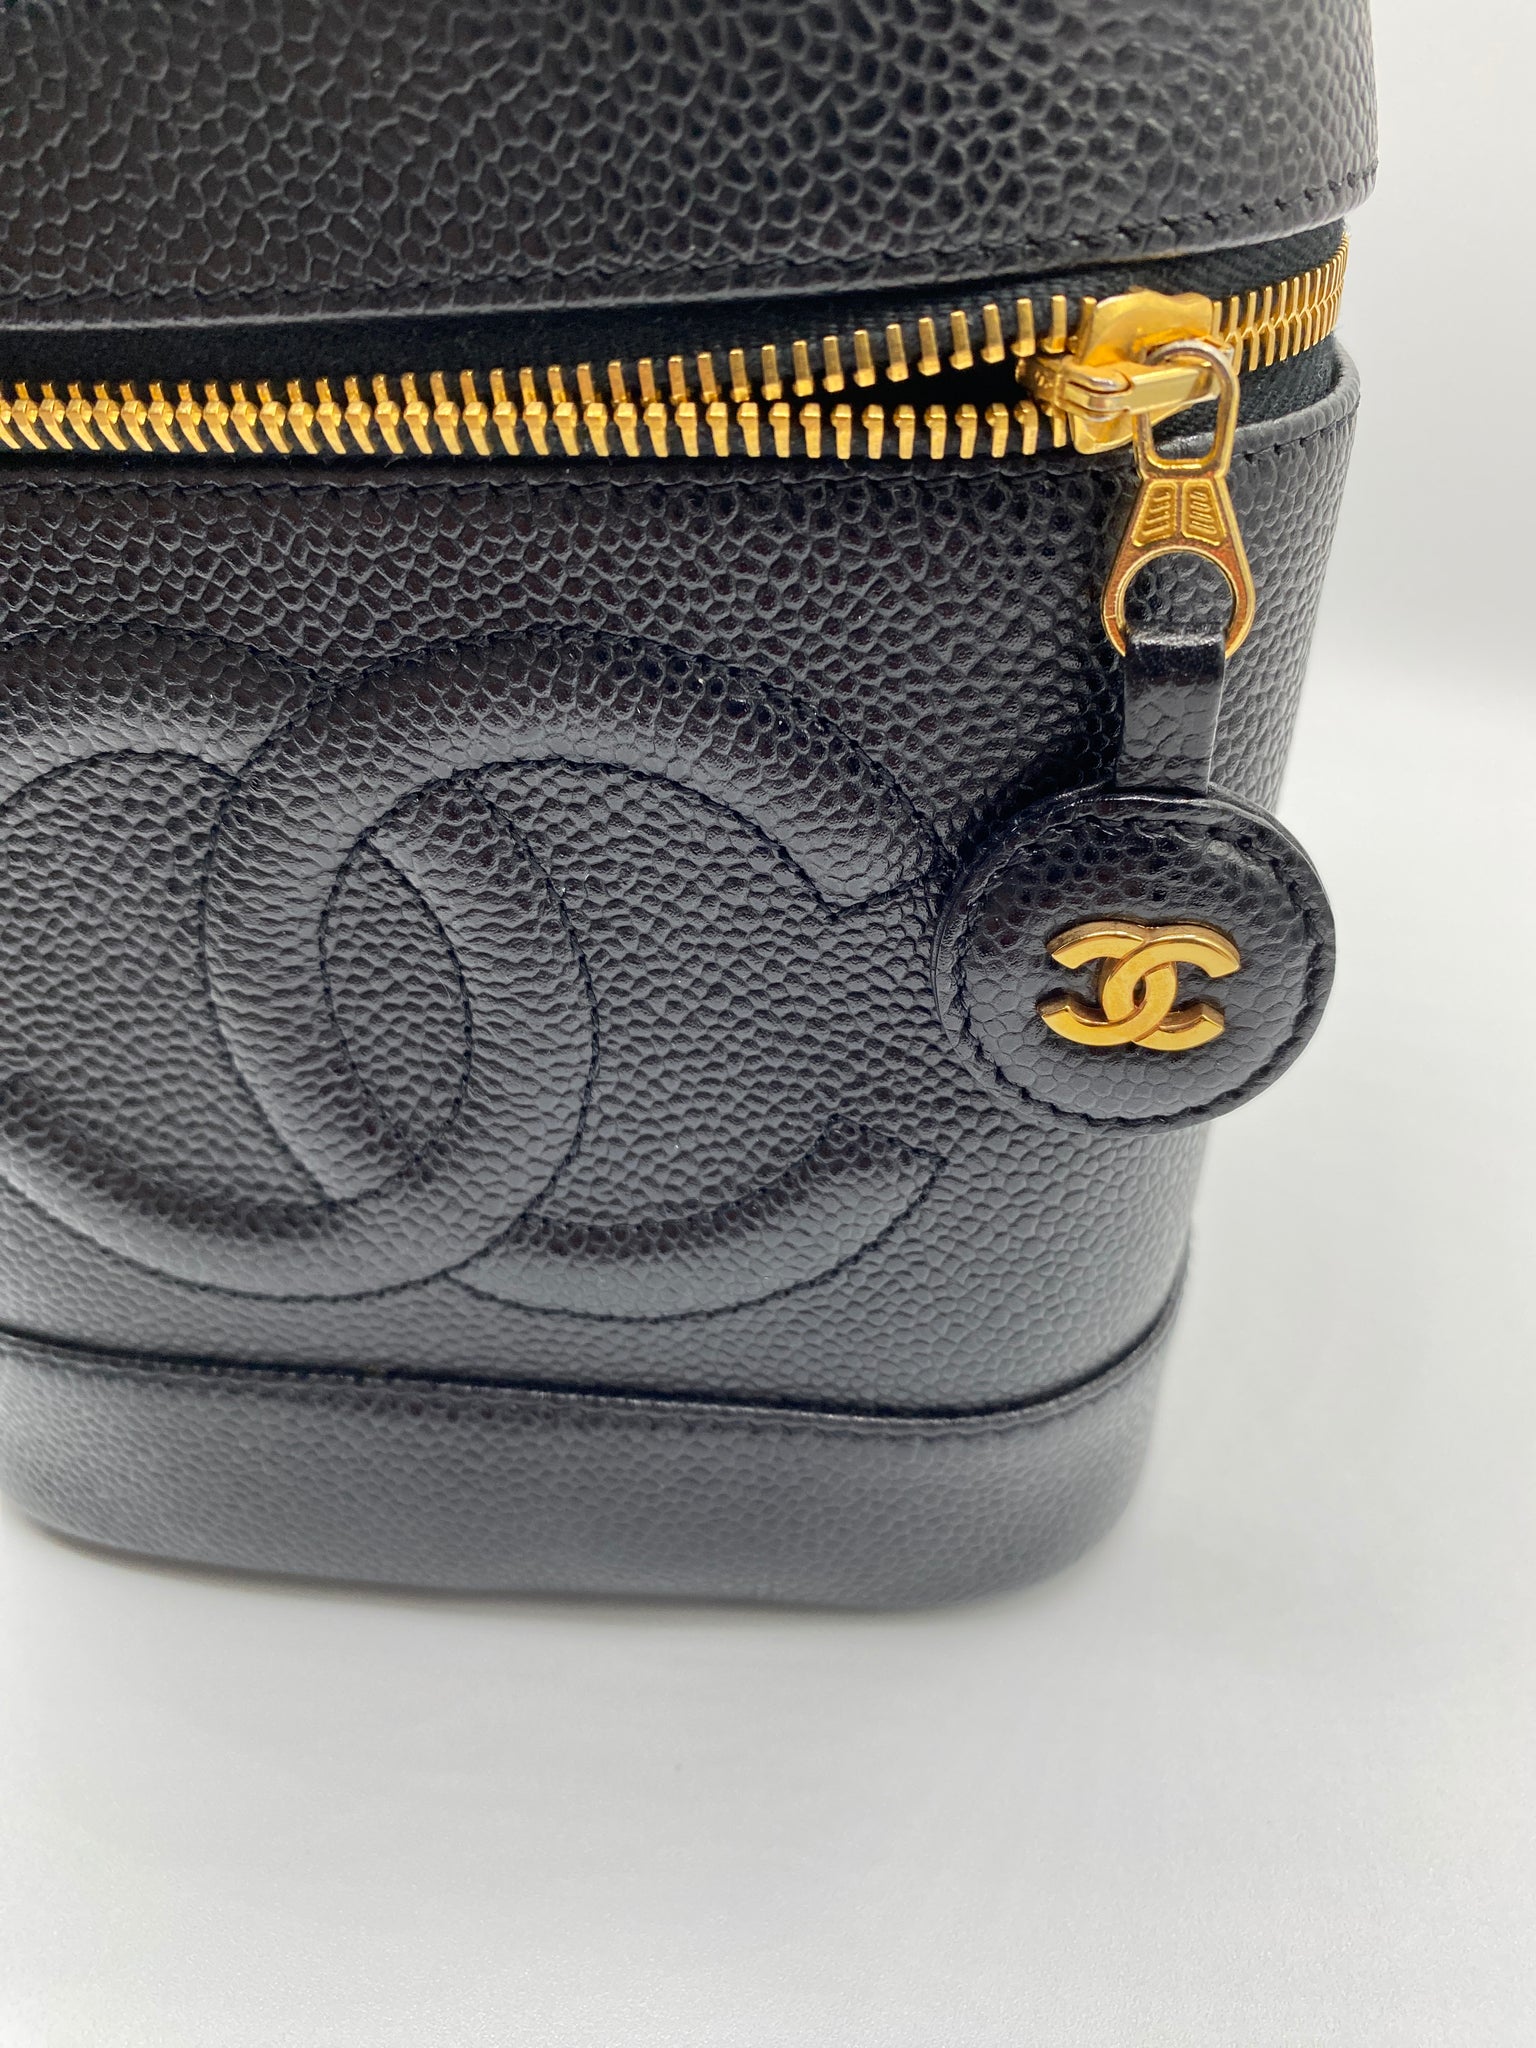 Chanel Cosmetic Caviar Pouch Used (5898)